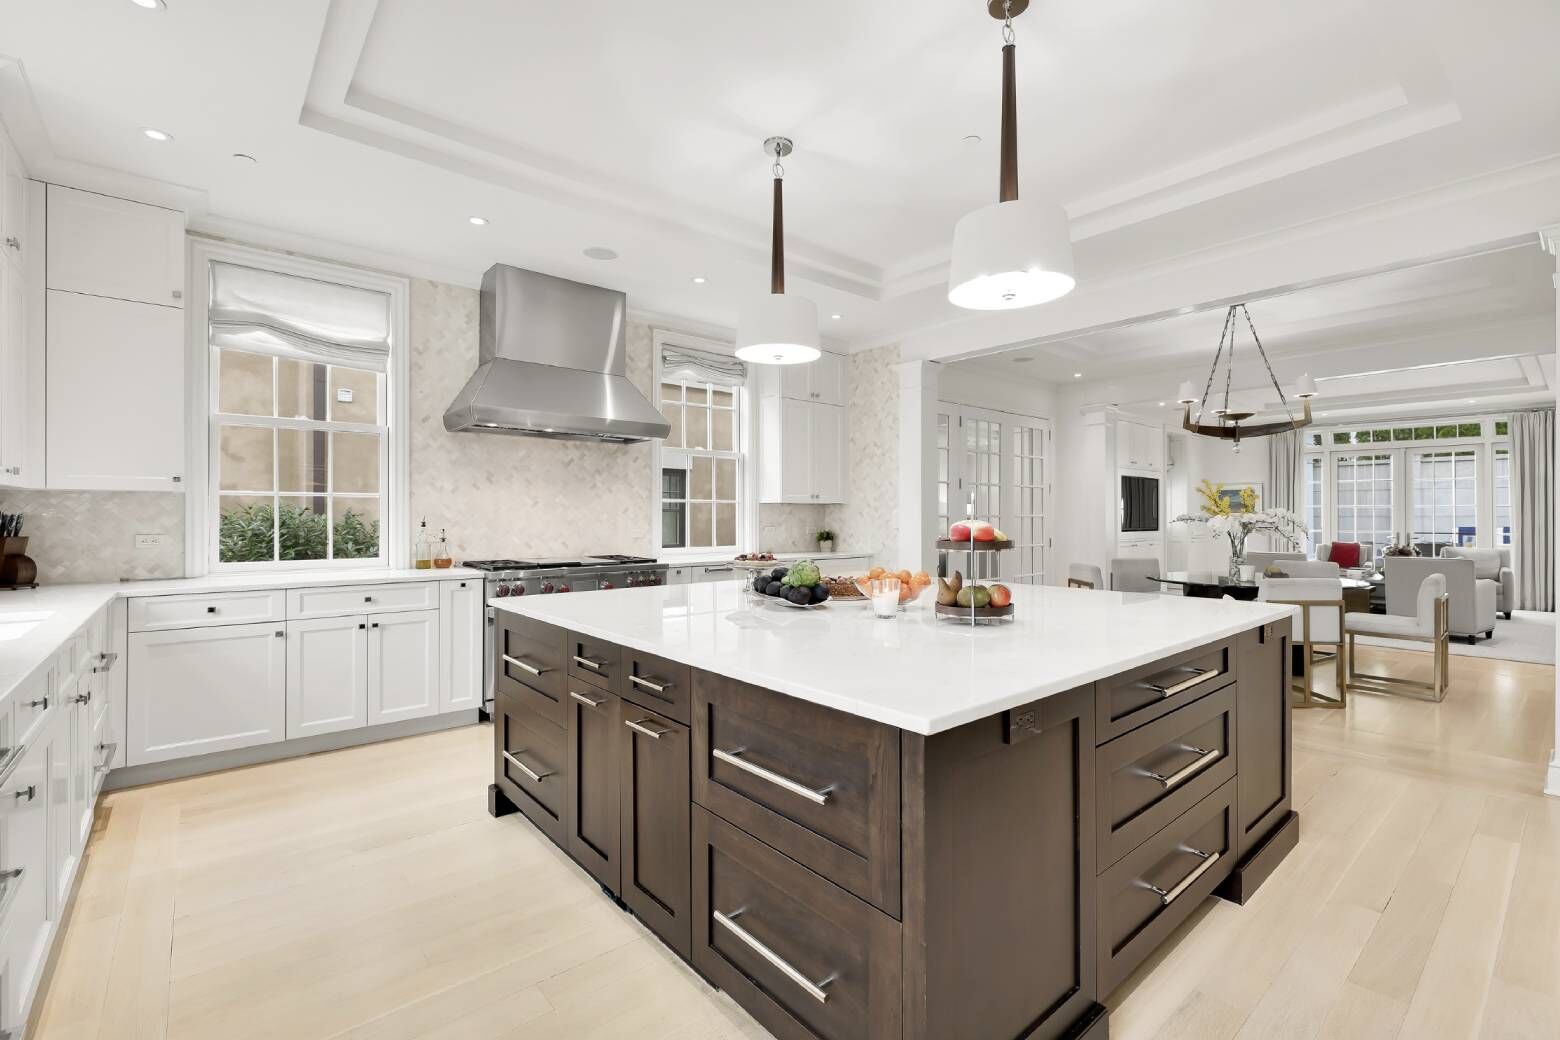 The 11,000-square-foot, five-bedroom home originally custom-built for Fox News host Brett Baier and his wife Amy in Northwest D.C.s exclusive Phillips Park neighborhood 14 years ago, has sold for $7.1 million. (TTR Sothebys International/Derek &amp; Vee Photography)